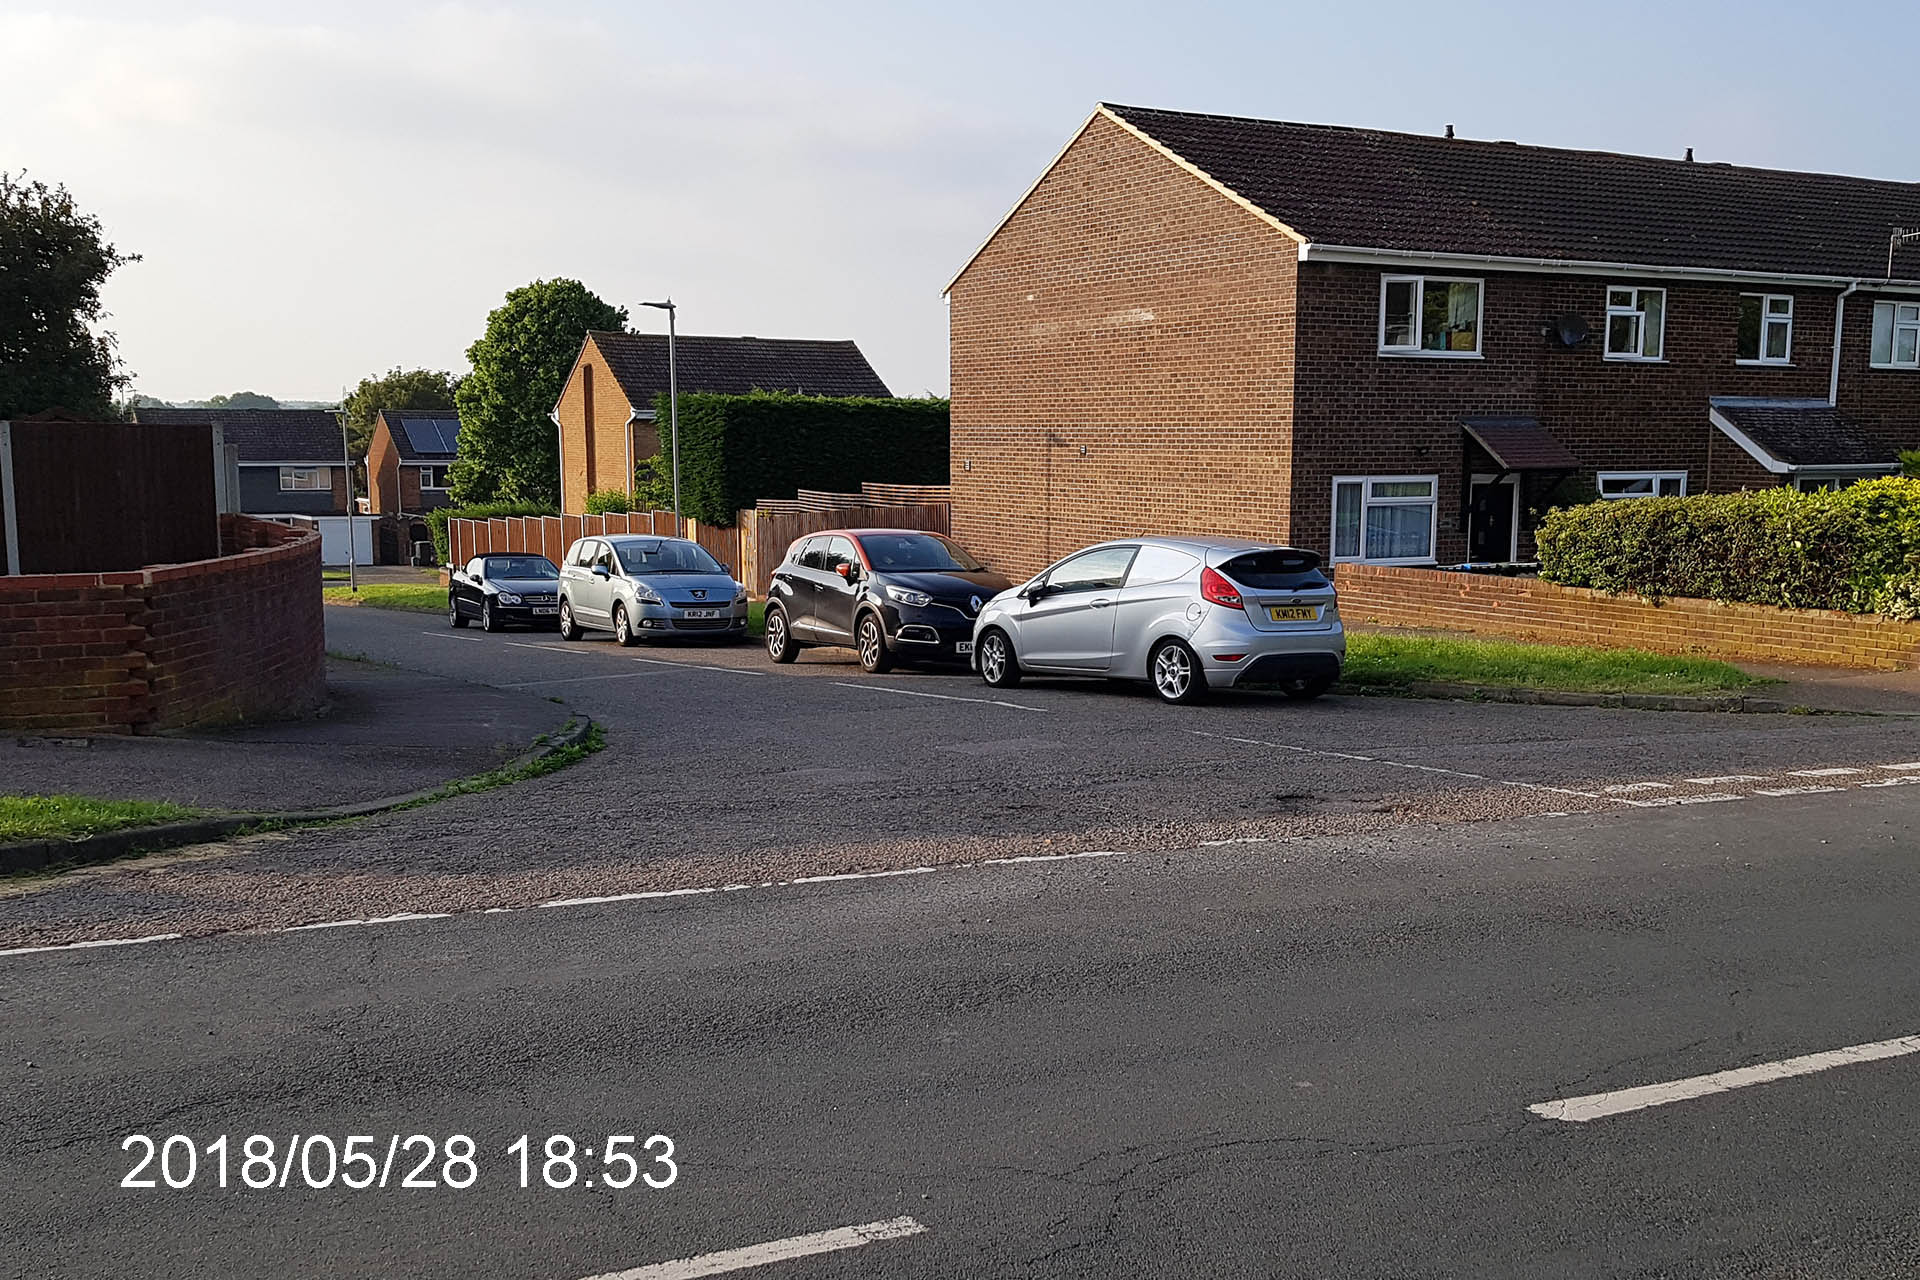 Inconsiderate parking in Grovehill